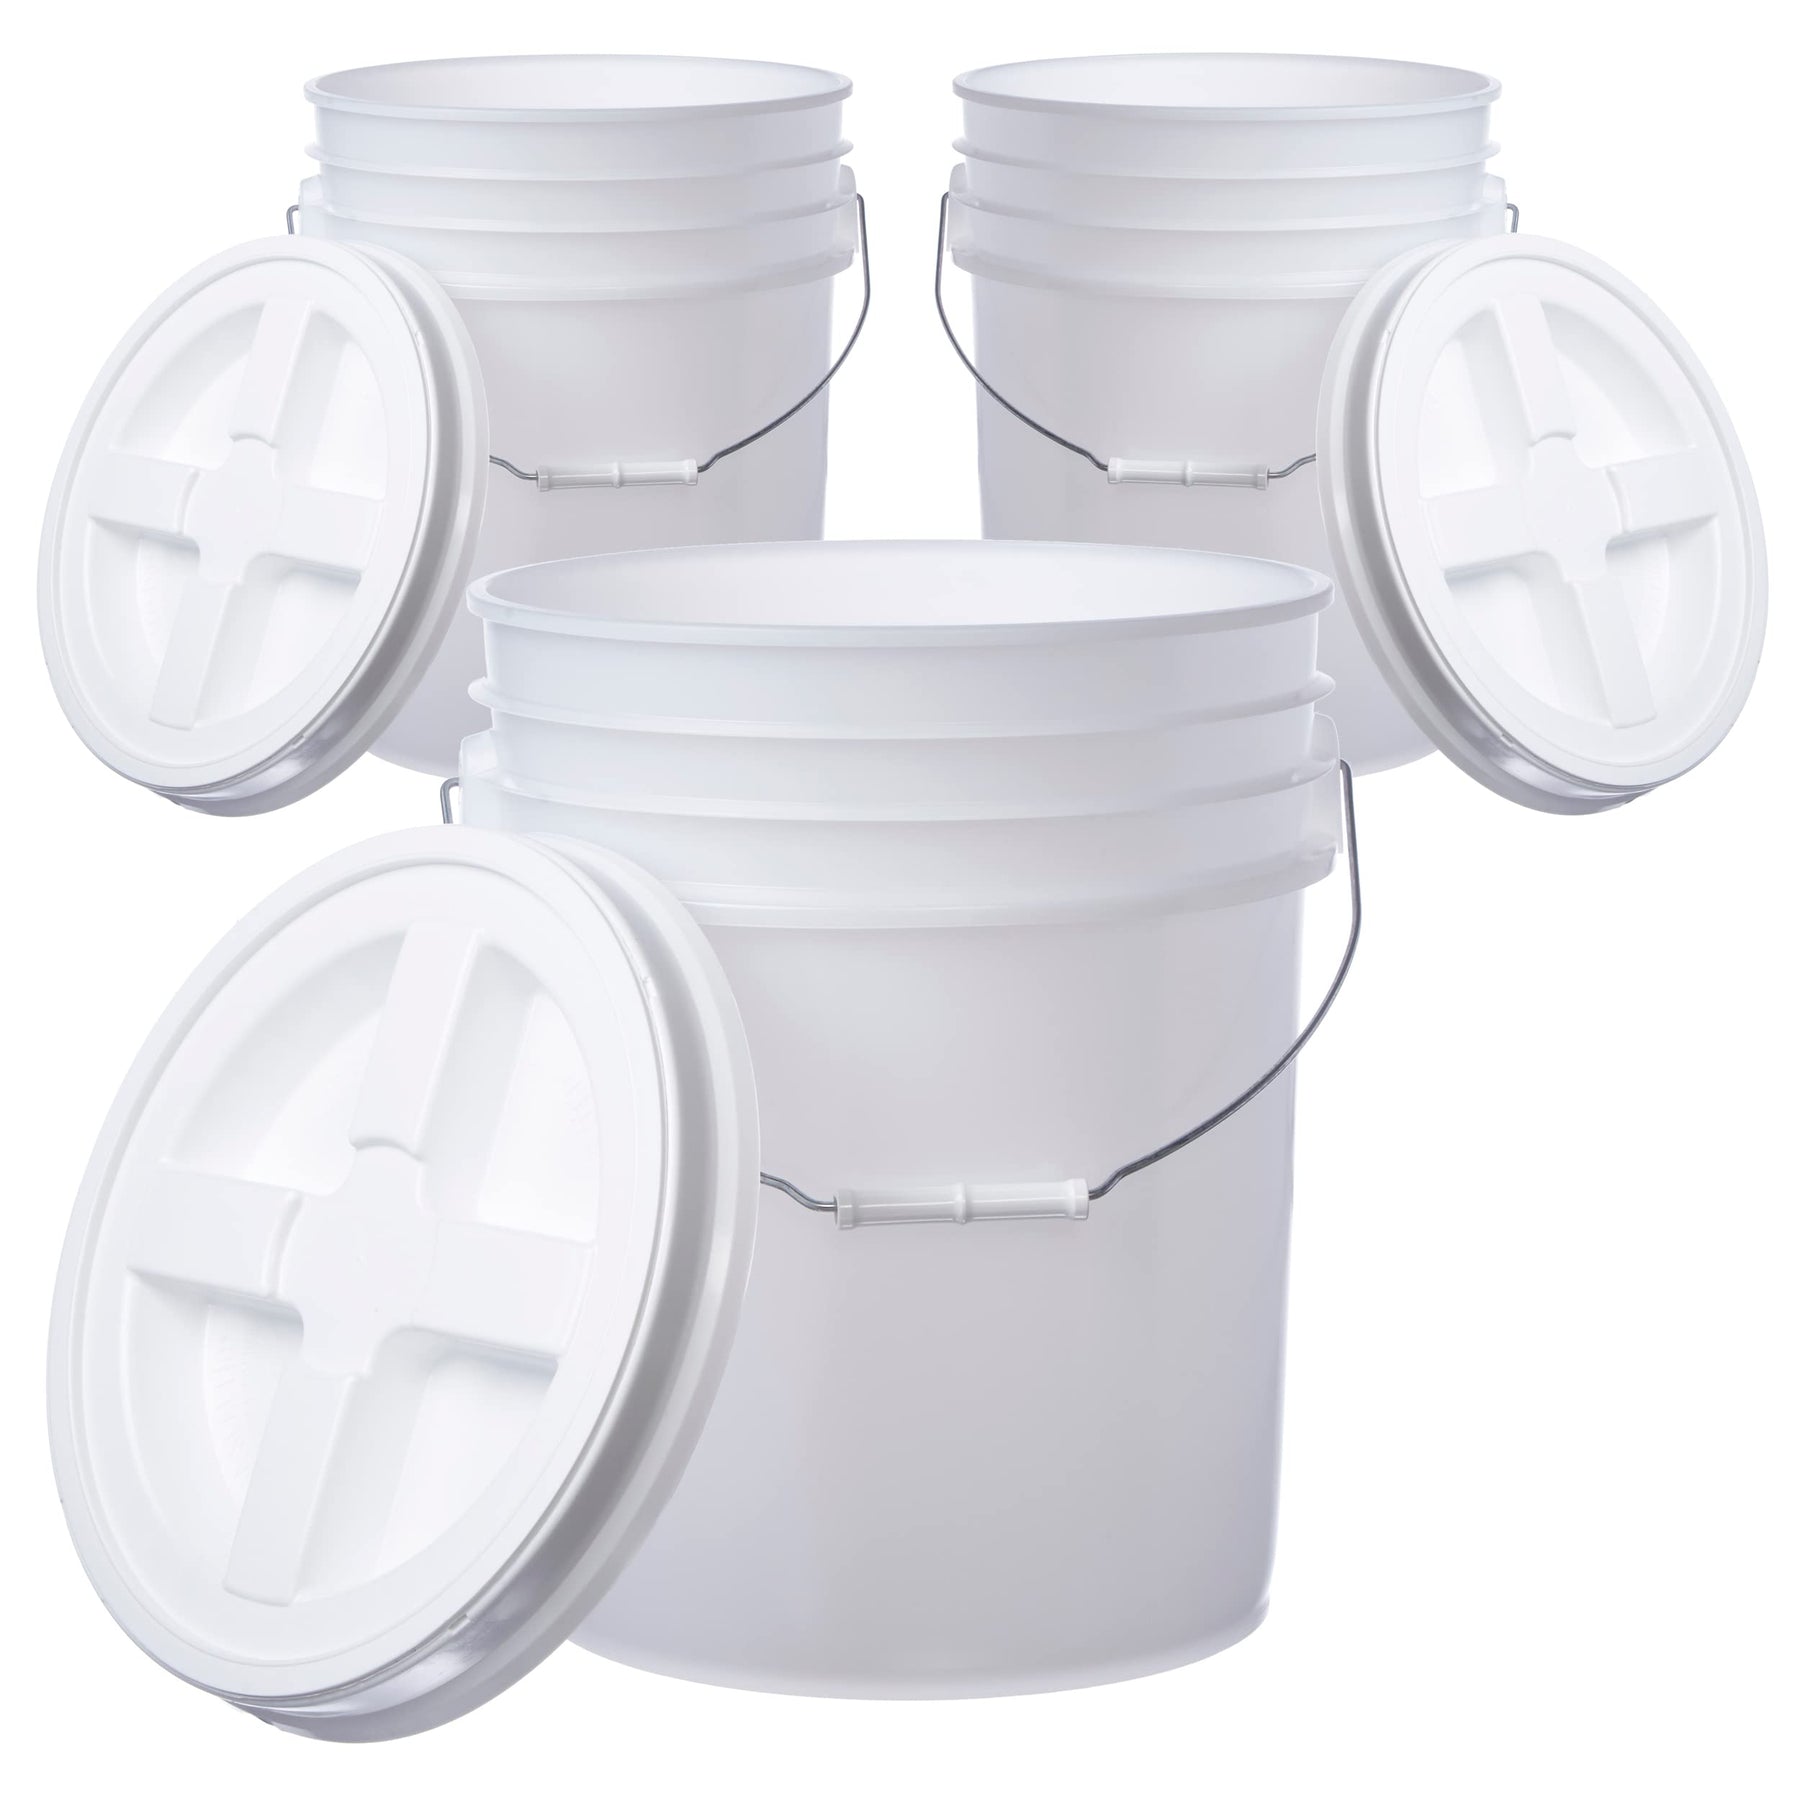 6 Gallon Food Grade BPA Free Buckets Pails with Screw on gasket lids (Pack  of 2)